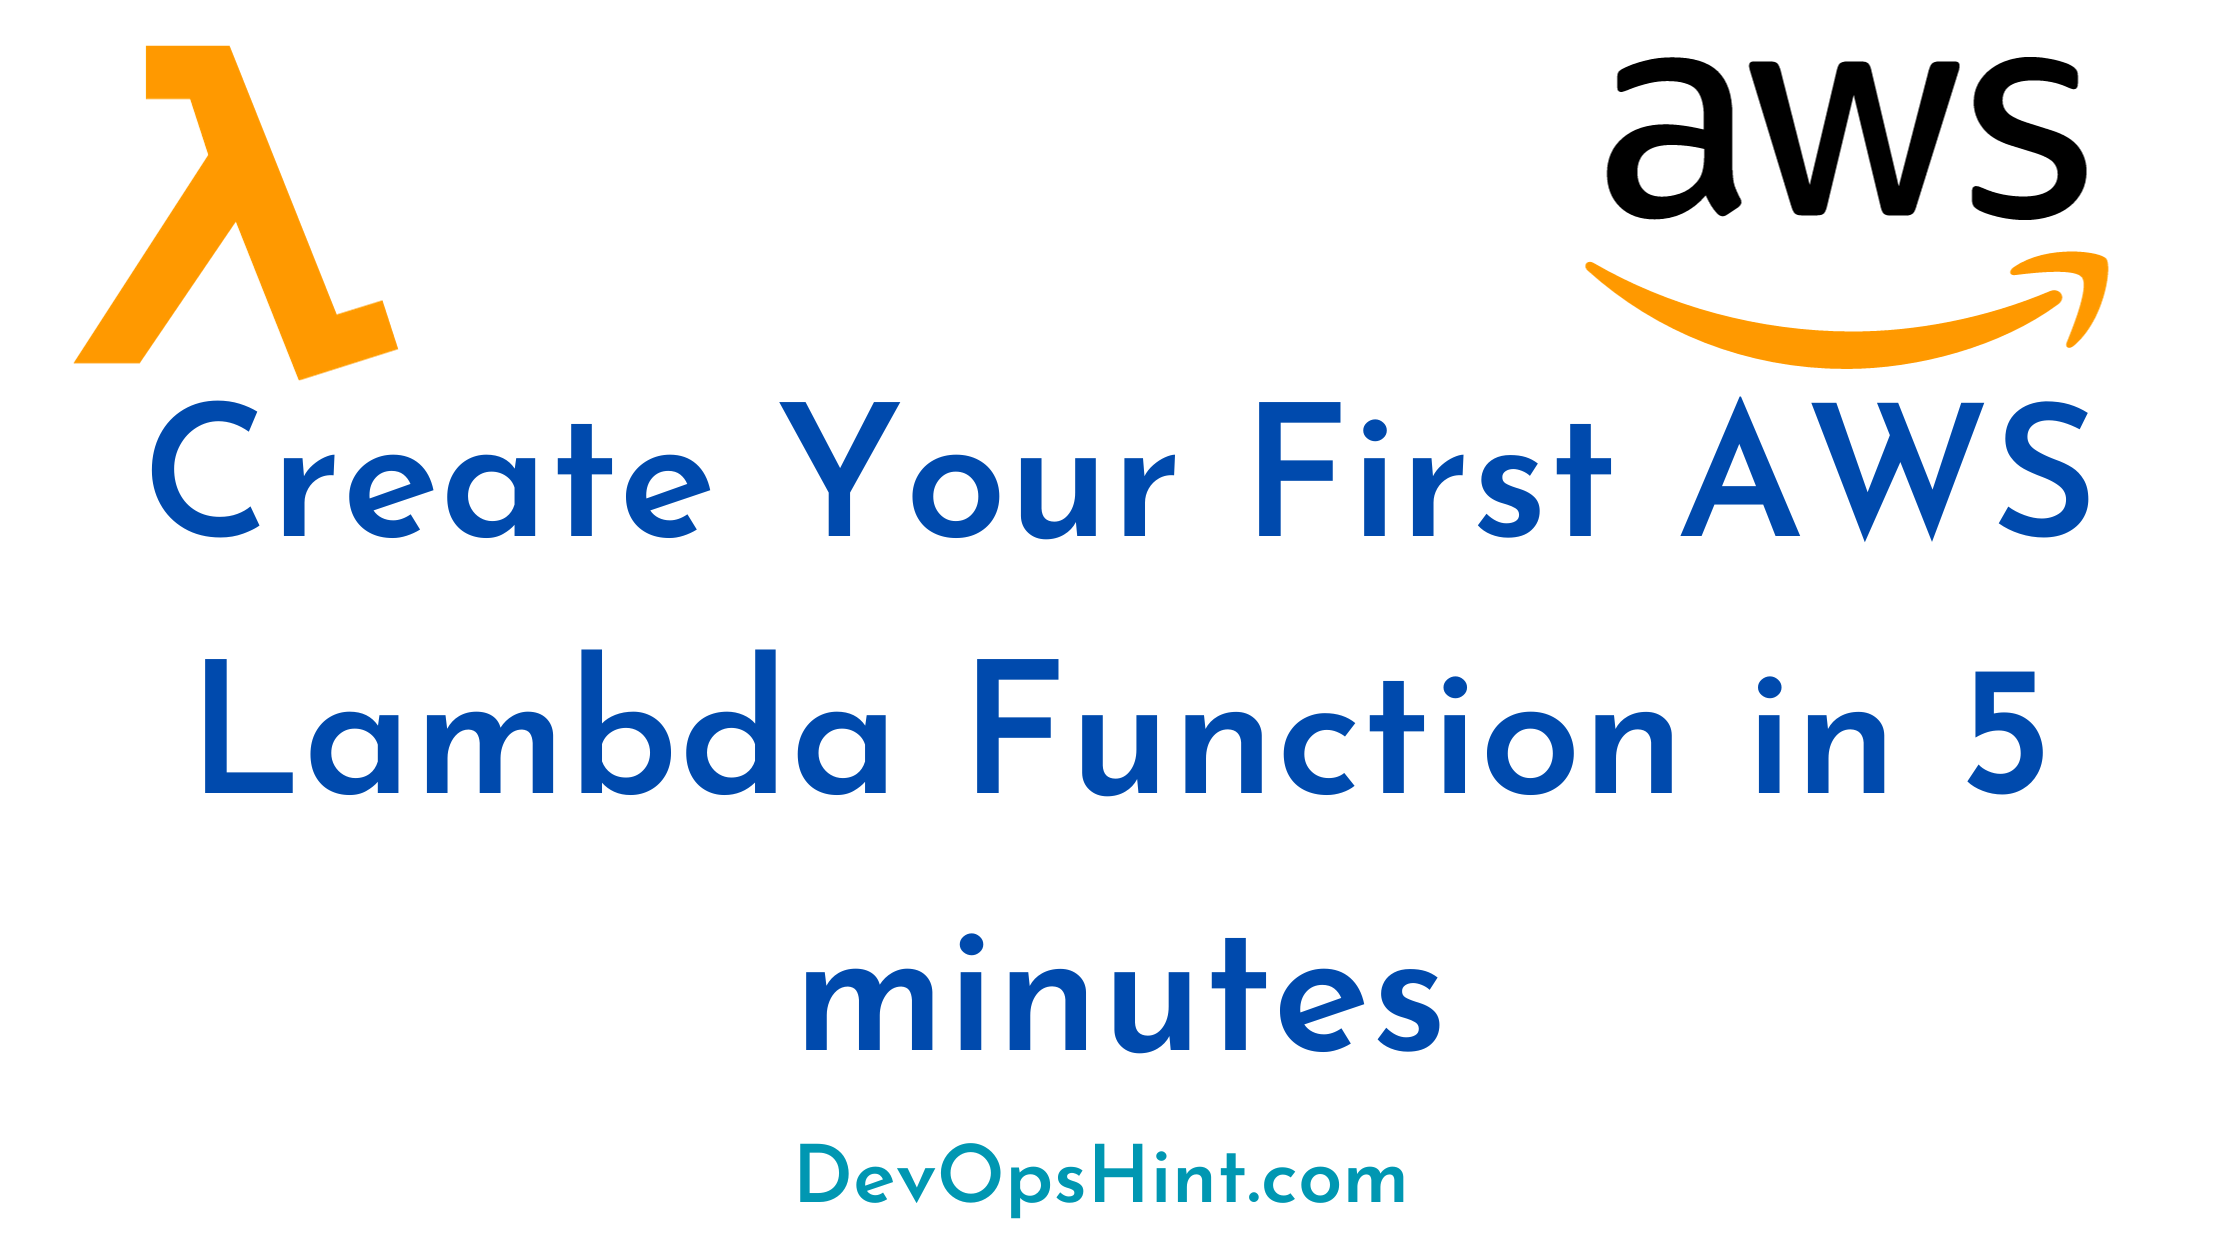 Create Your First AWS Lambda Function in 5 minutes